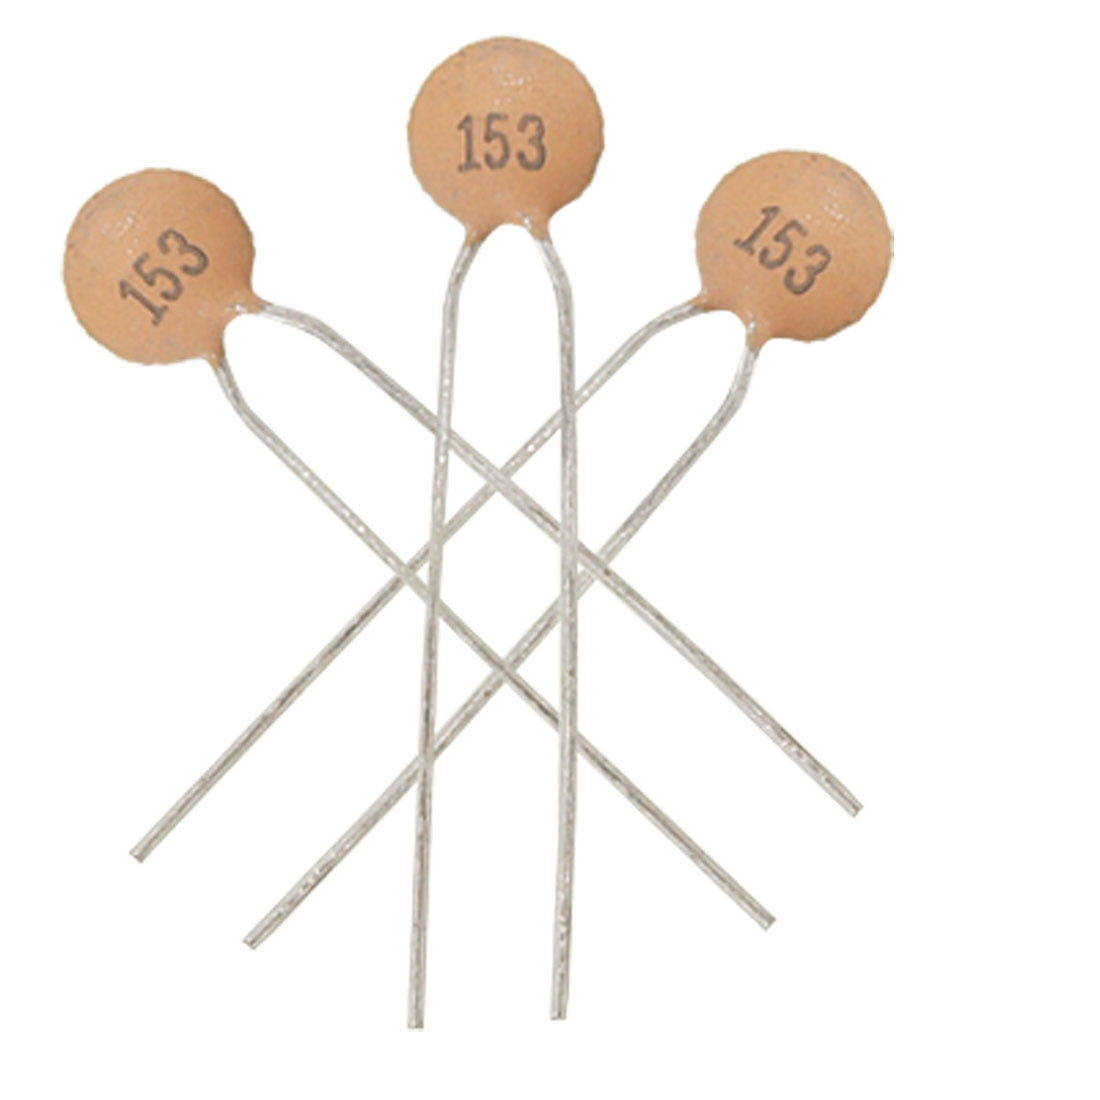 120pf Ceramic Disc Capacitor 2.5mm Pitch 50V Pack of 20 